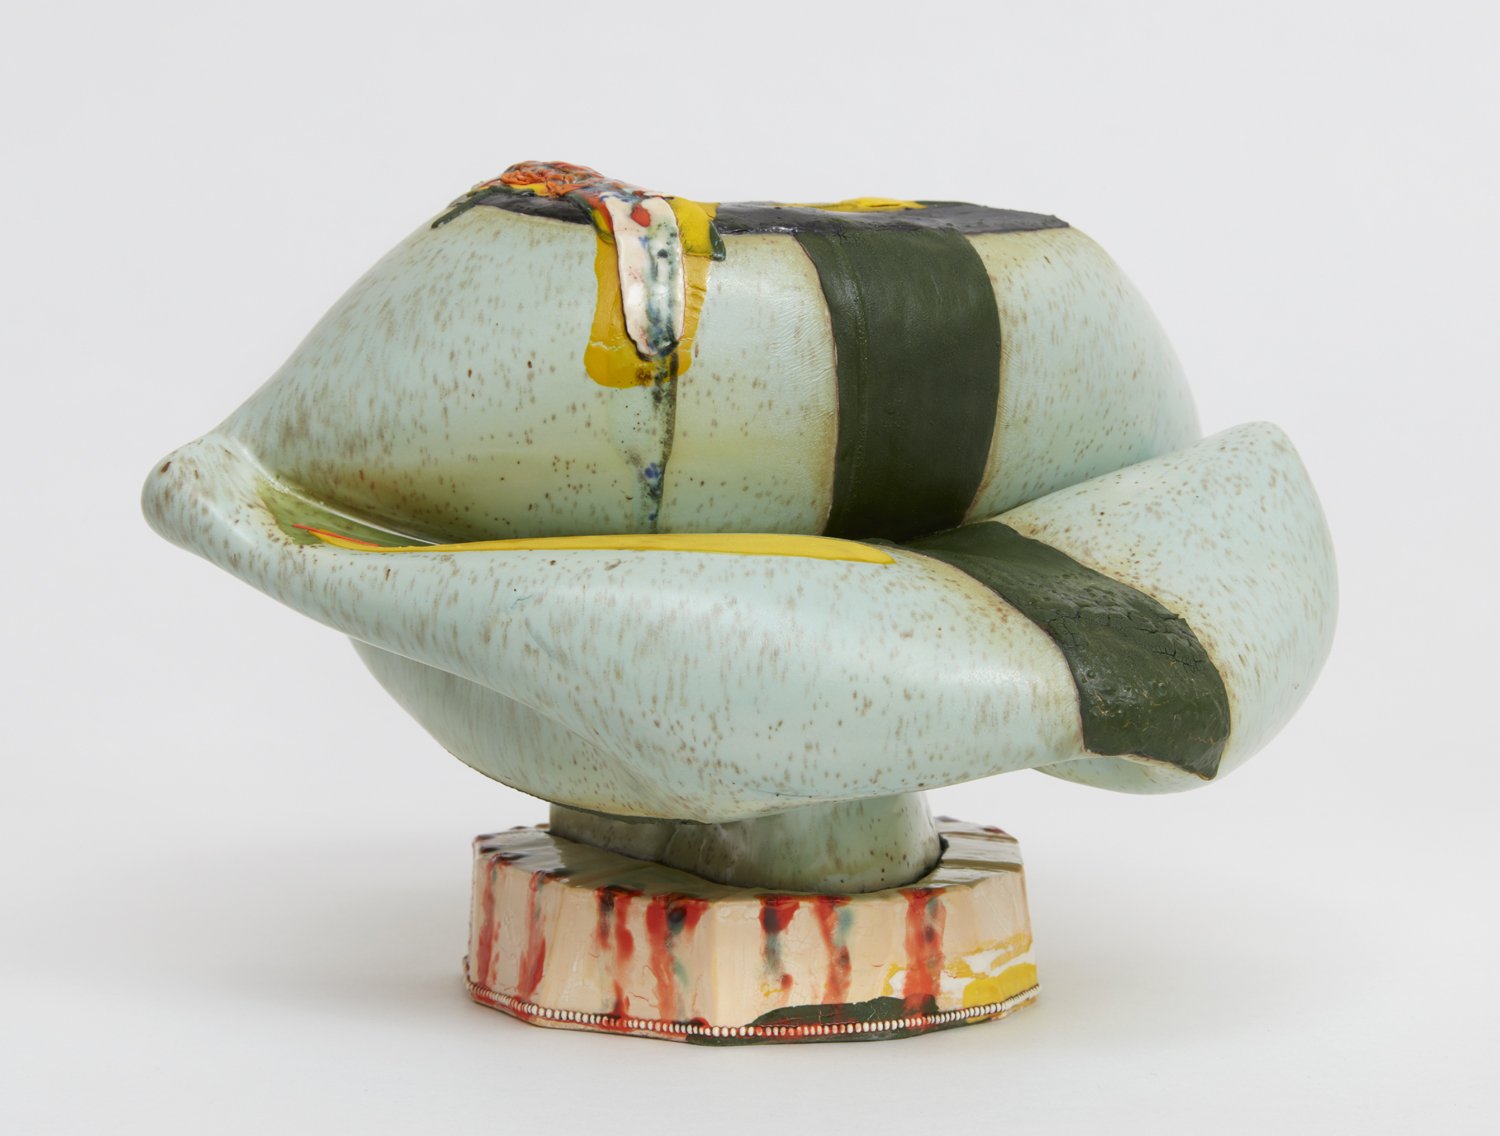  Kathy Butterly (United States, born 1963),  Super Bloom , 2019, clay, glaze, 6 1/4 x 9 1/2 x 10 inches. The Ruttenberg '52 Collection, Chicago. © Kathy Butterly. Image courtesy the artist and James Cohan, New York. Photo: Alan Wiener.  